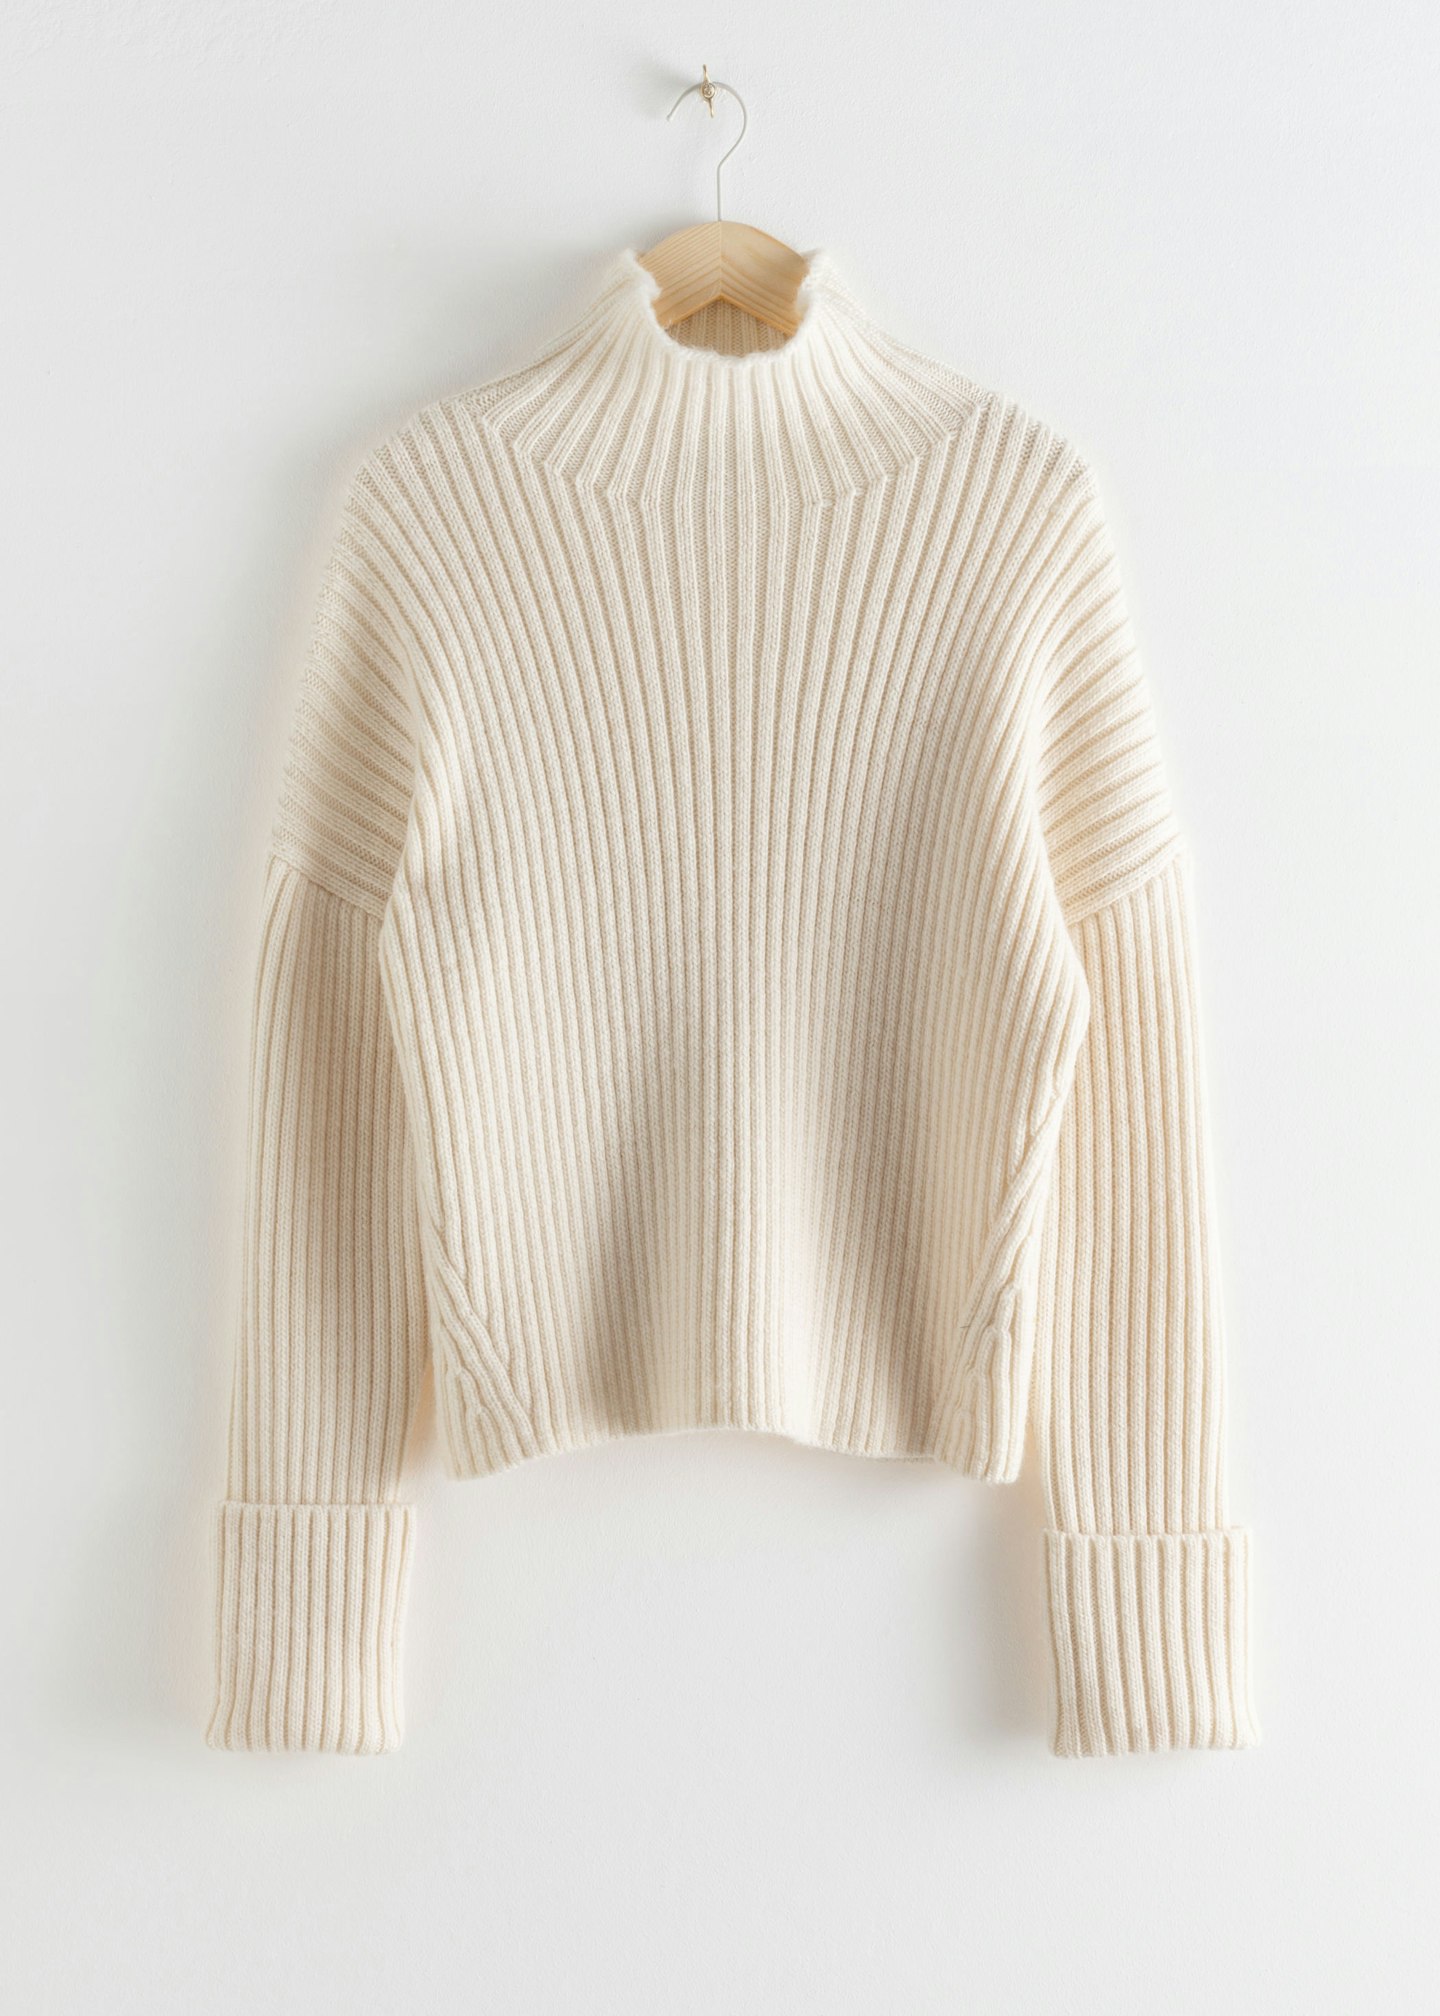 & Other Stories, Slouchy Wool Blend Ribbed Turtleneck, £95